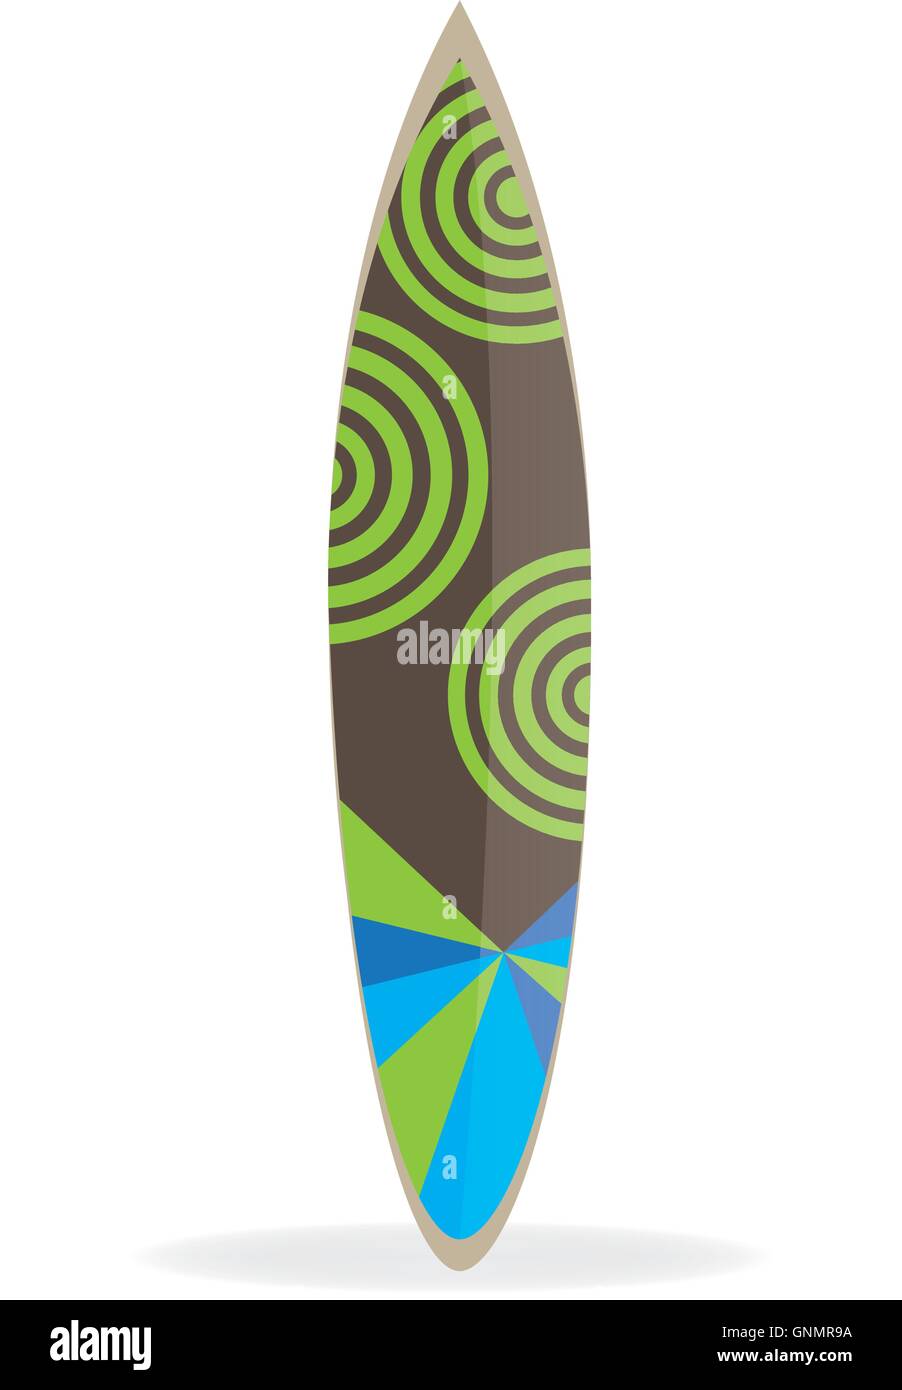 Isolated surfboard with a texture composed by circles on a white background Stock Vector